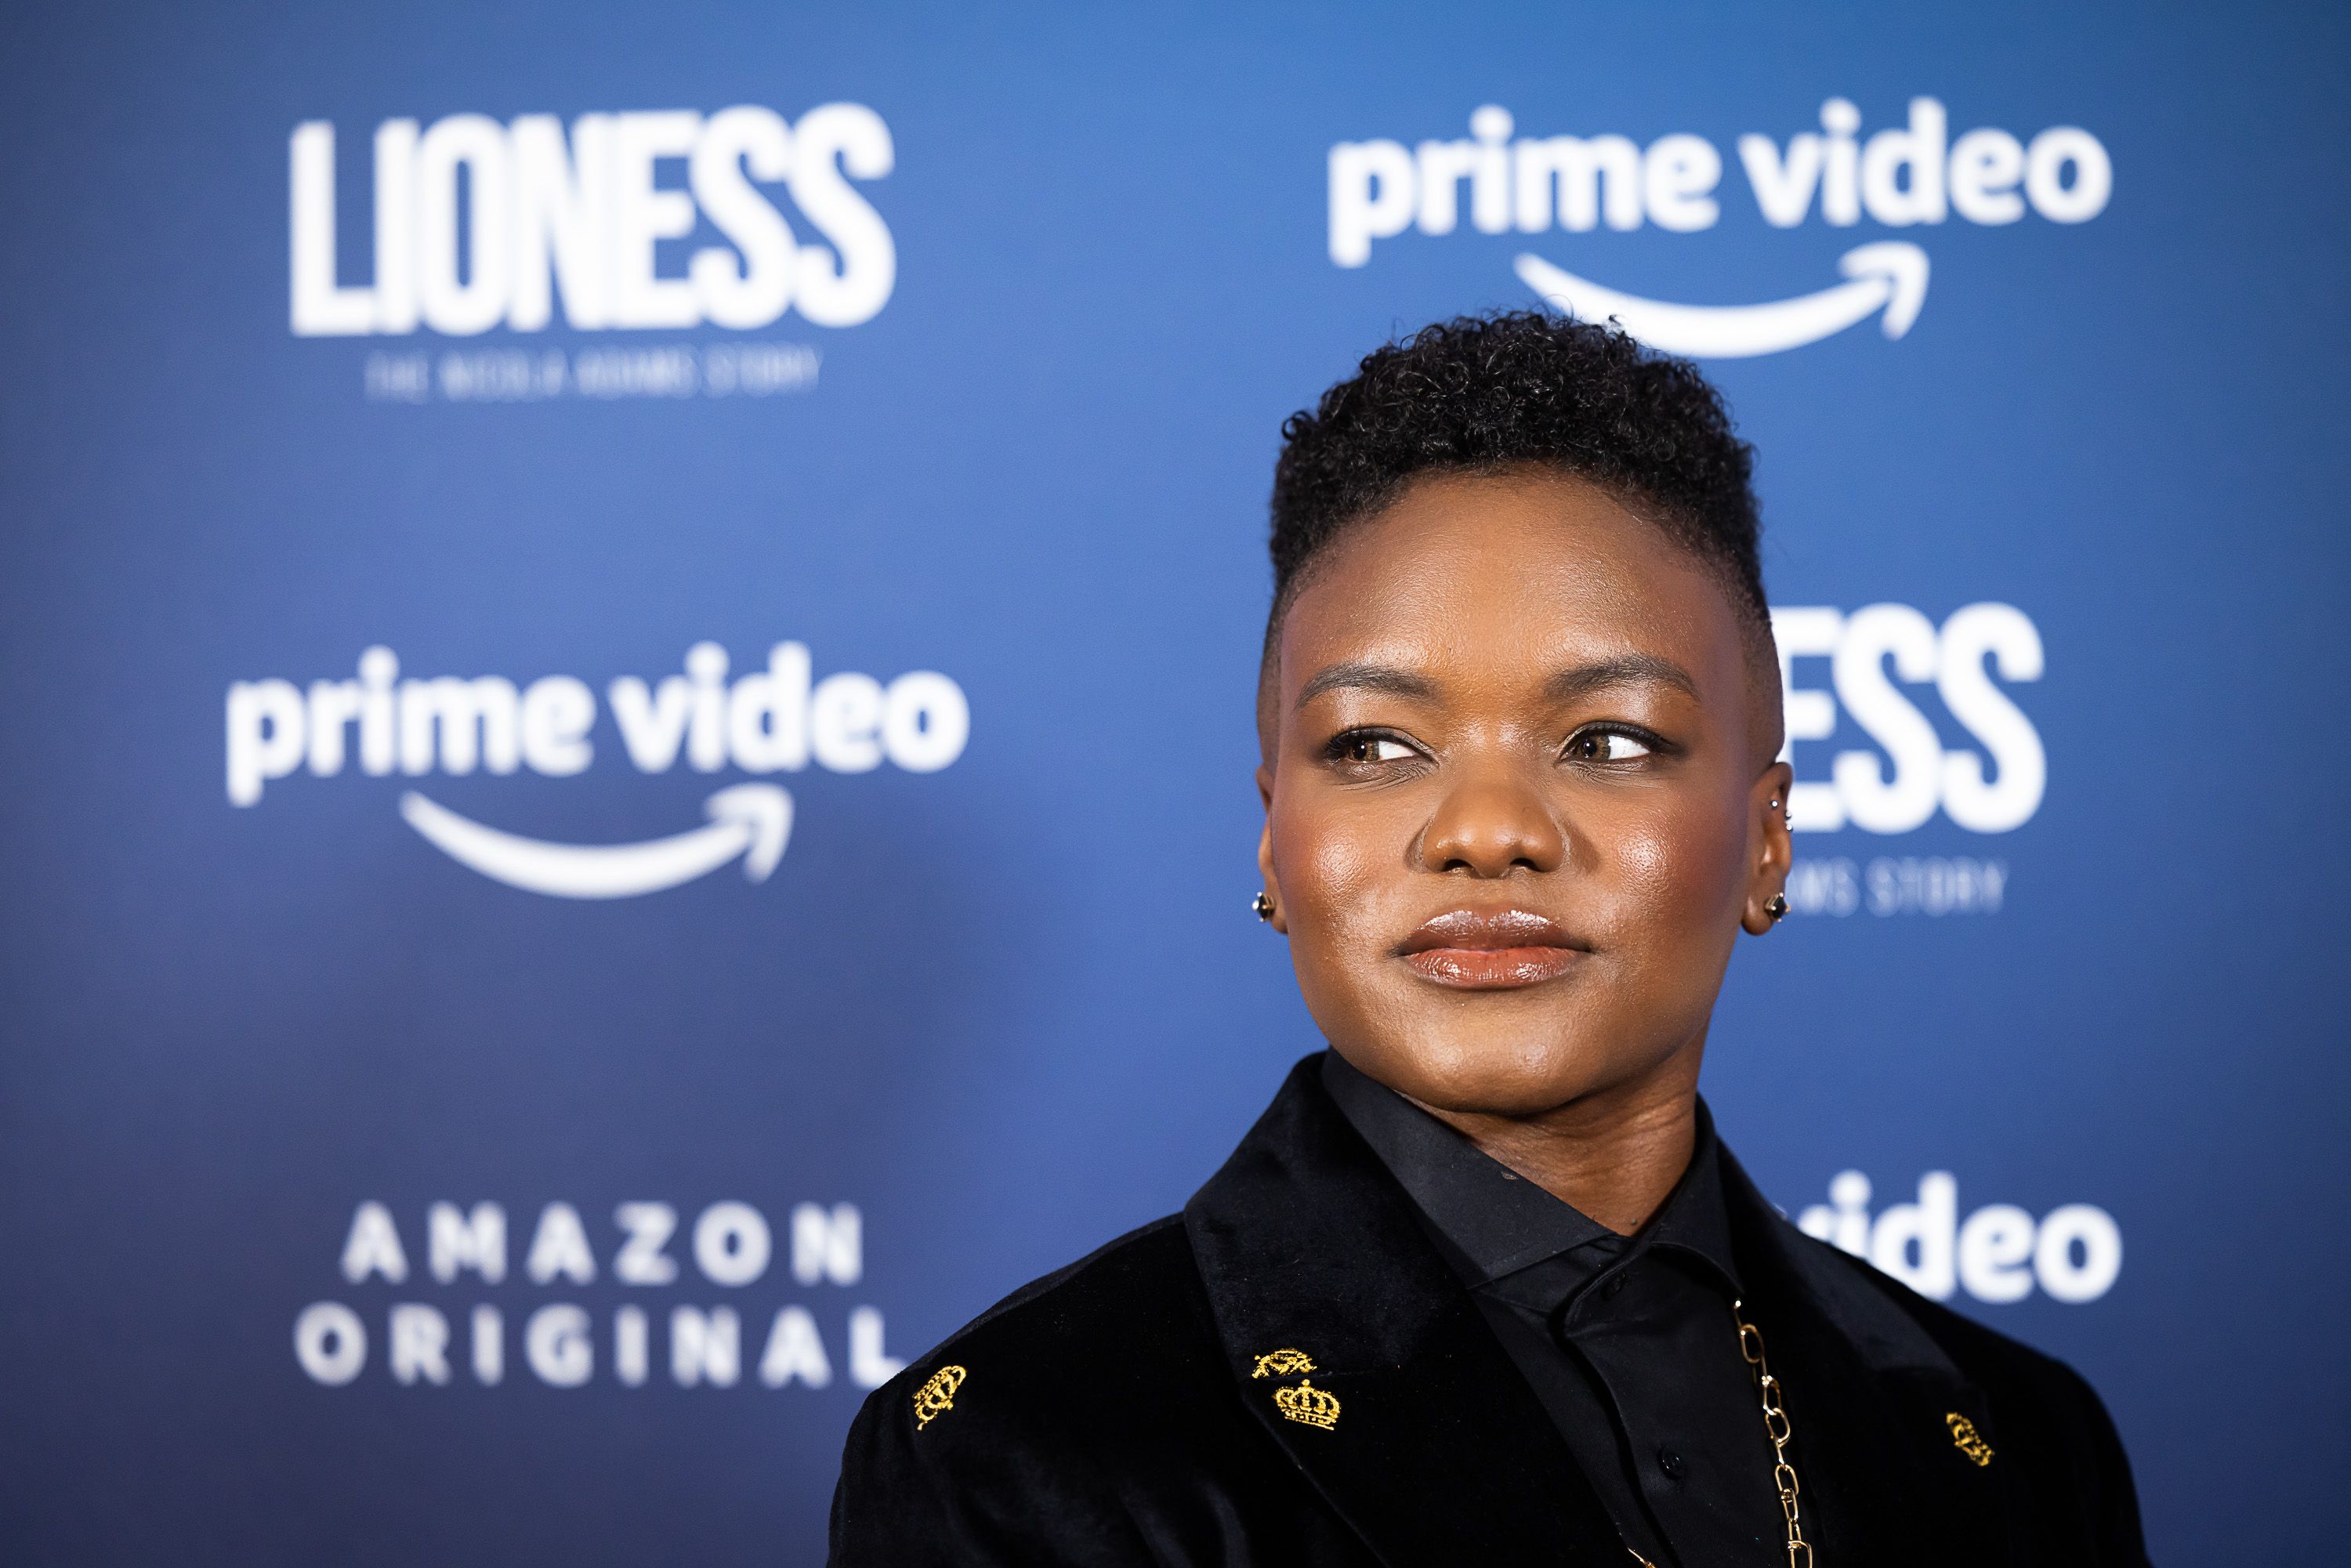 Lioness The Nicola Adams Story Watch Full Documentary Online